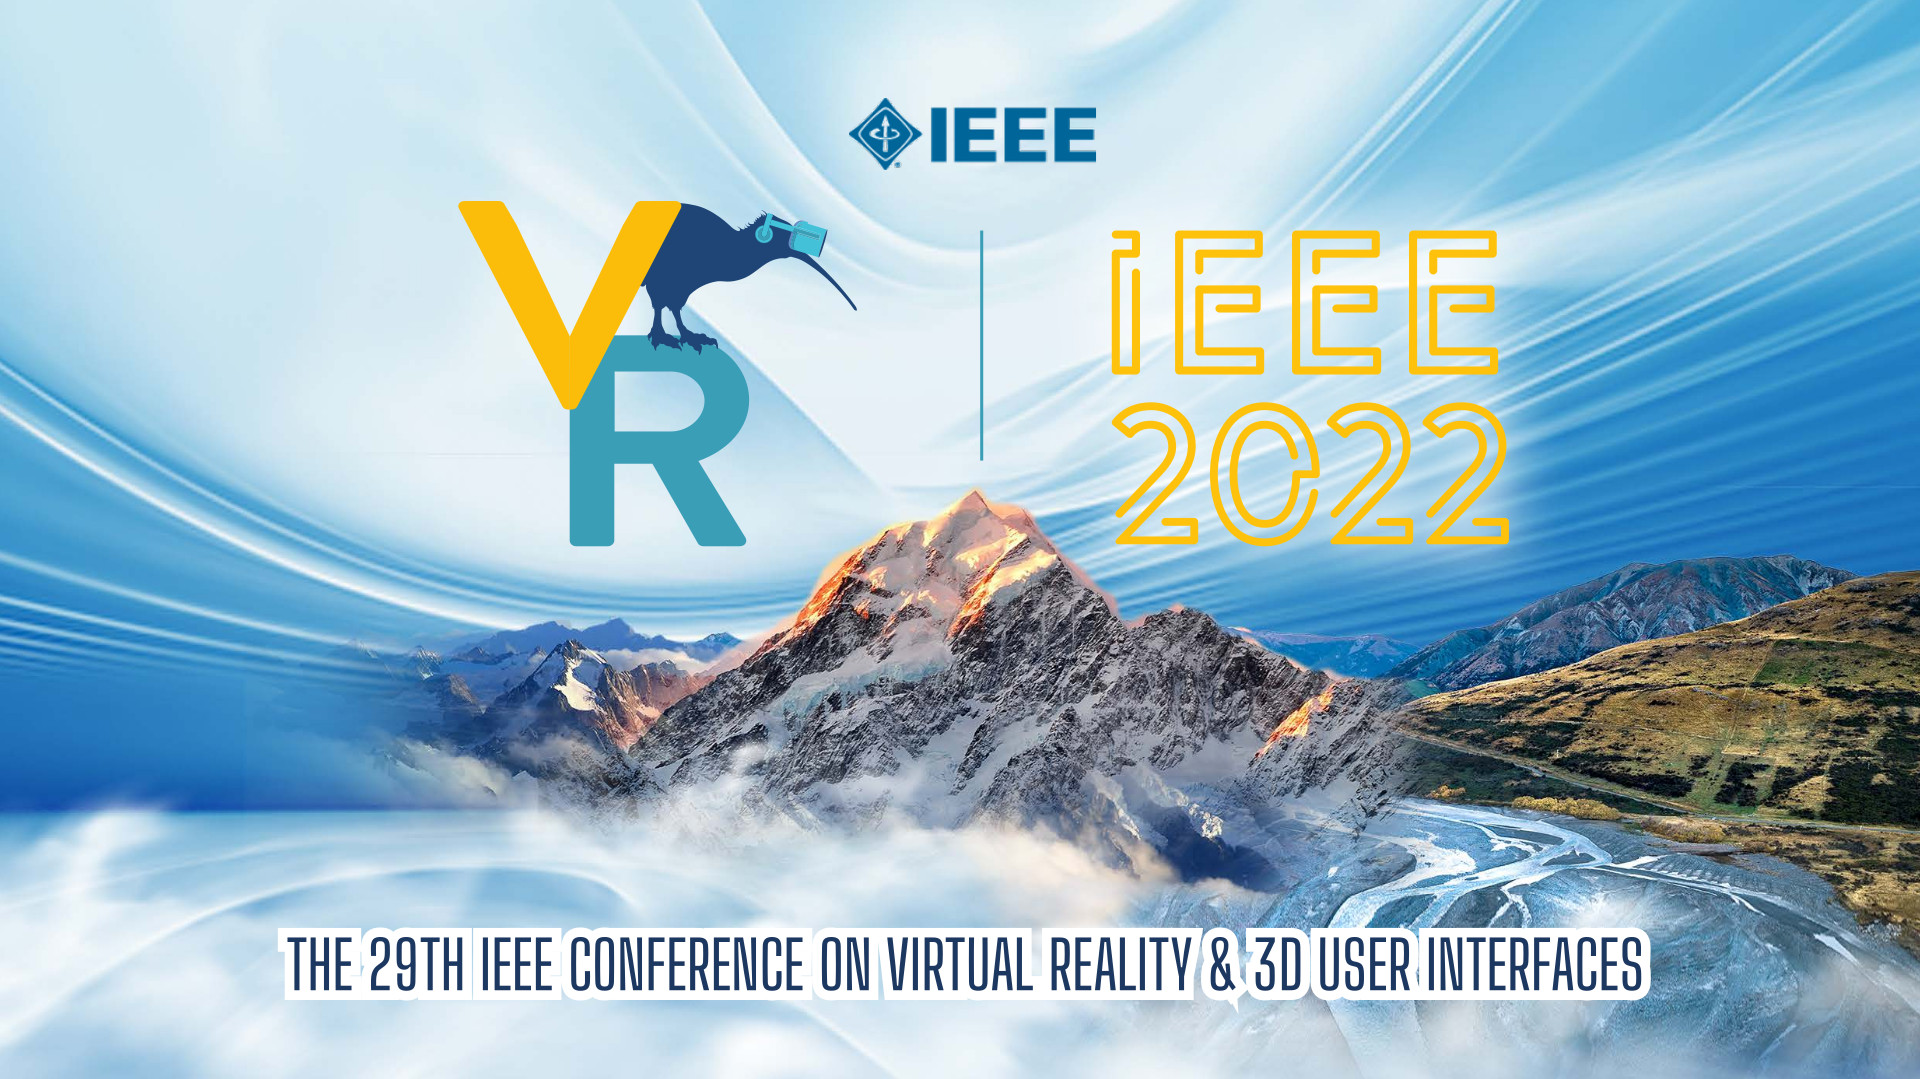 The IEEE VR 2022 logo imposed on an image of a mountain. The logo consists of VR written in yellow and blue, with a kiwi wearing a VR headset standing on top of the R.